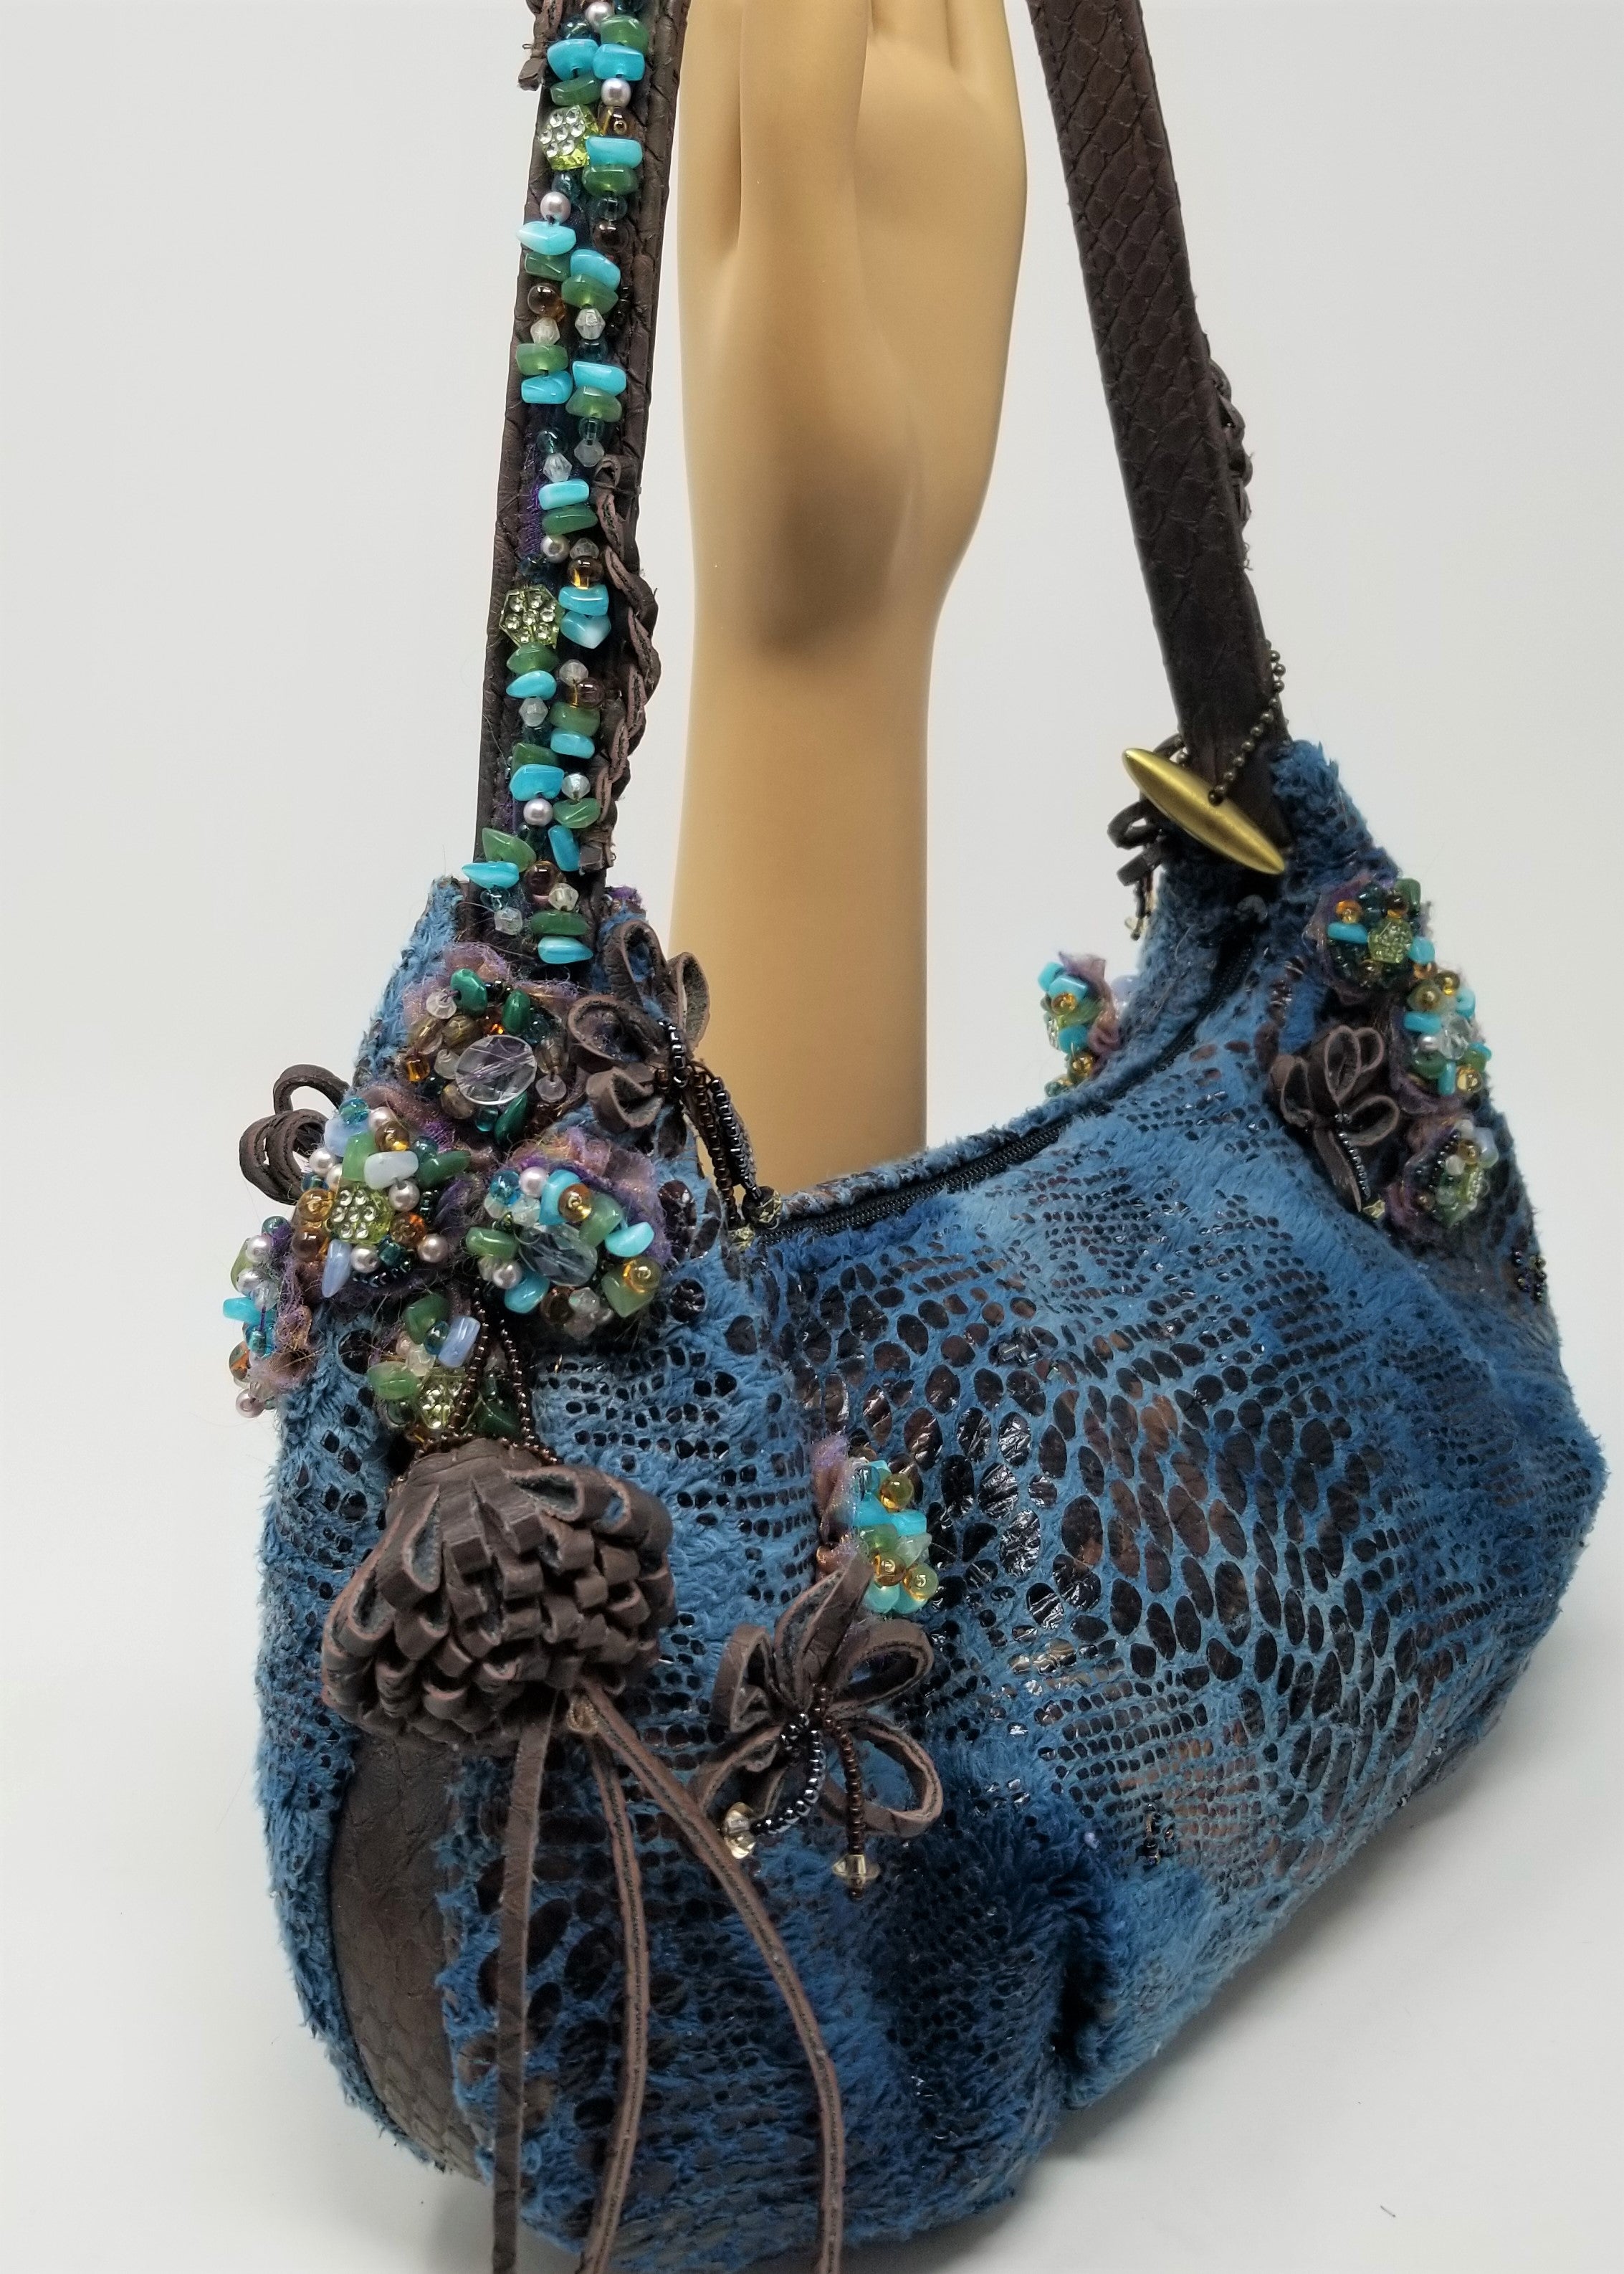 Mary Francis Purse Blue Animal Print w/ Beads & Leather